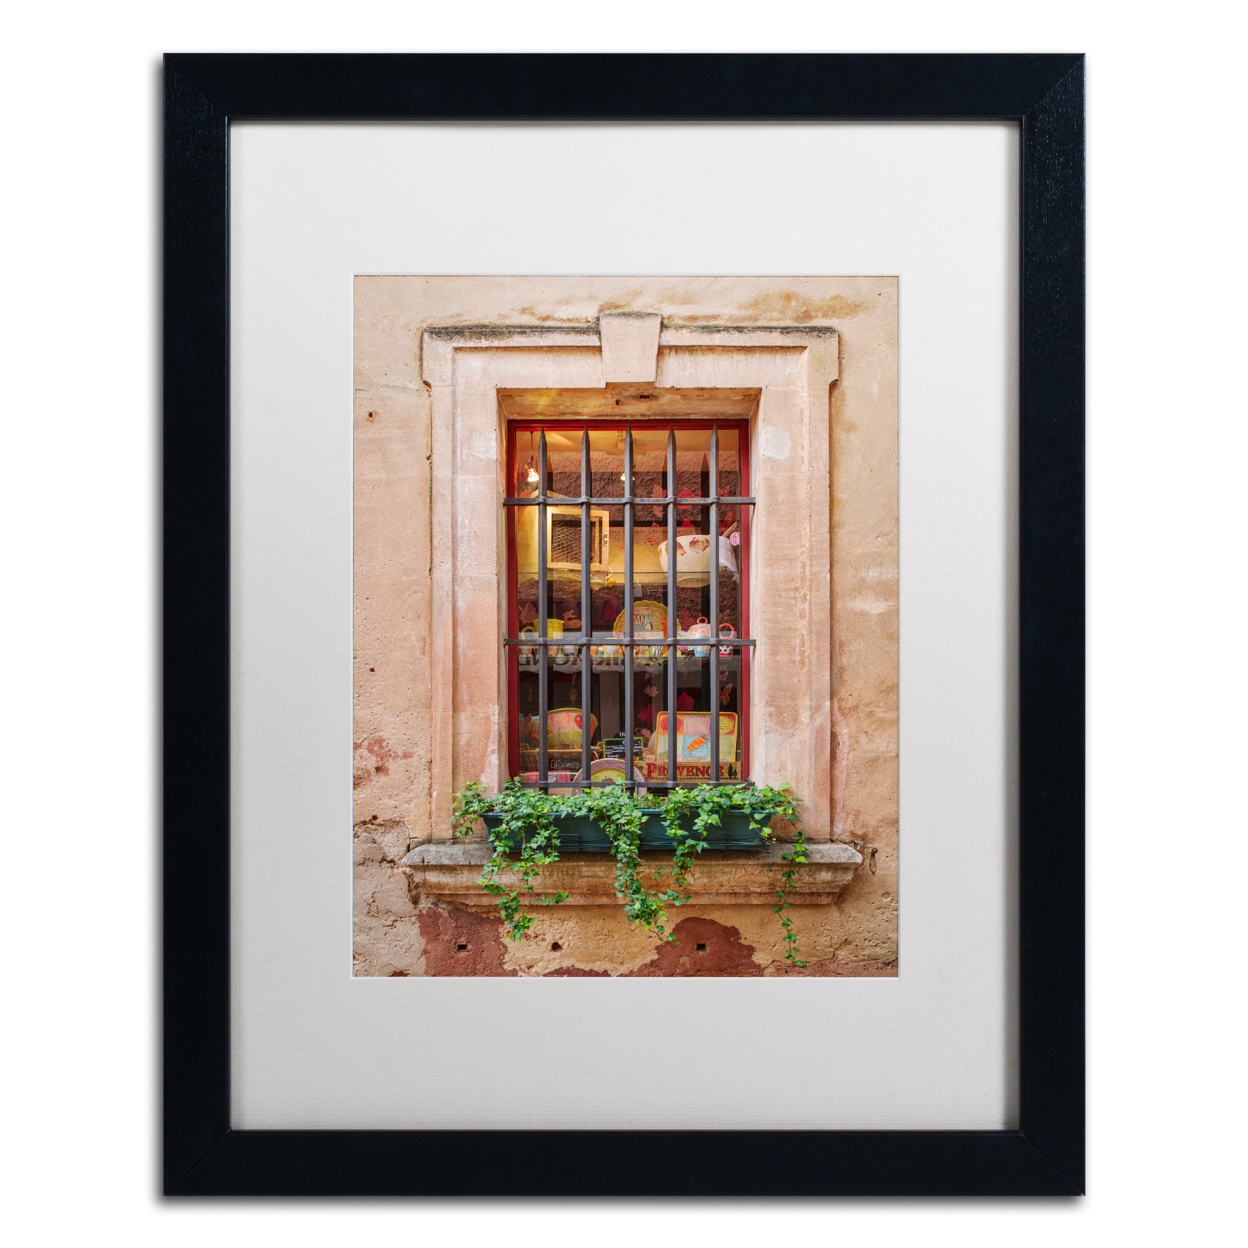 Michael Blanchette Photography 'Window Shopping' Black Wooden Framed Art 18 X 22 Inches